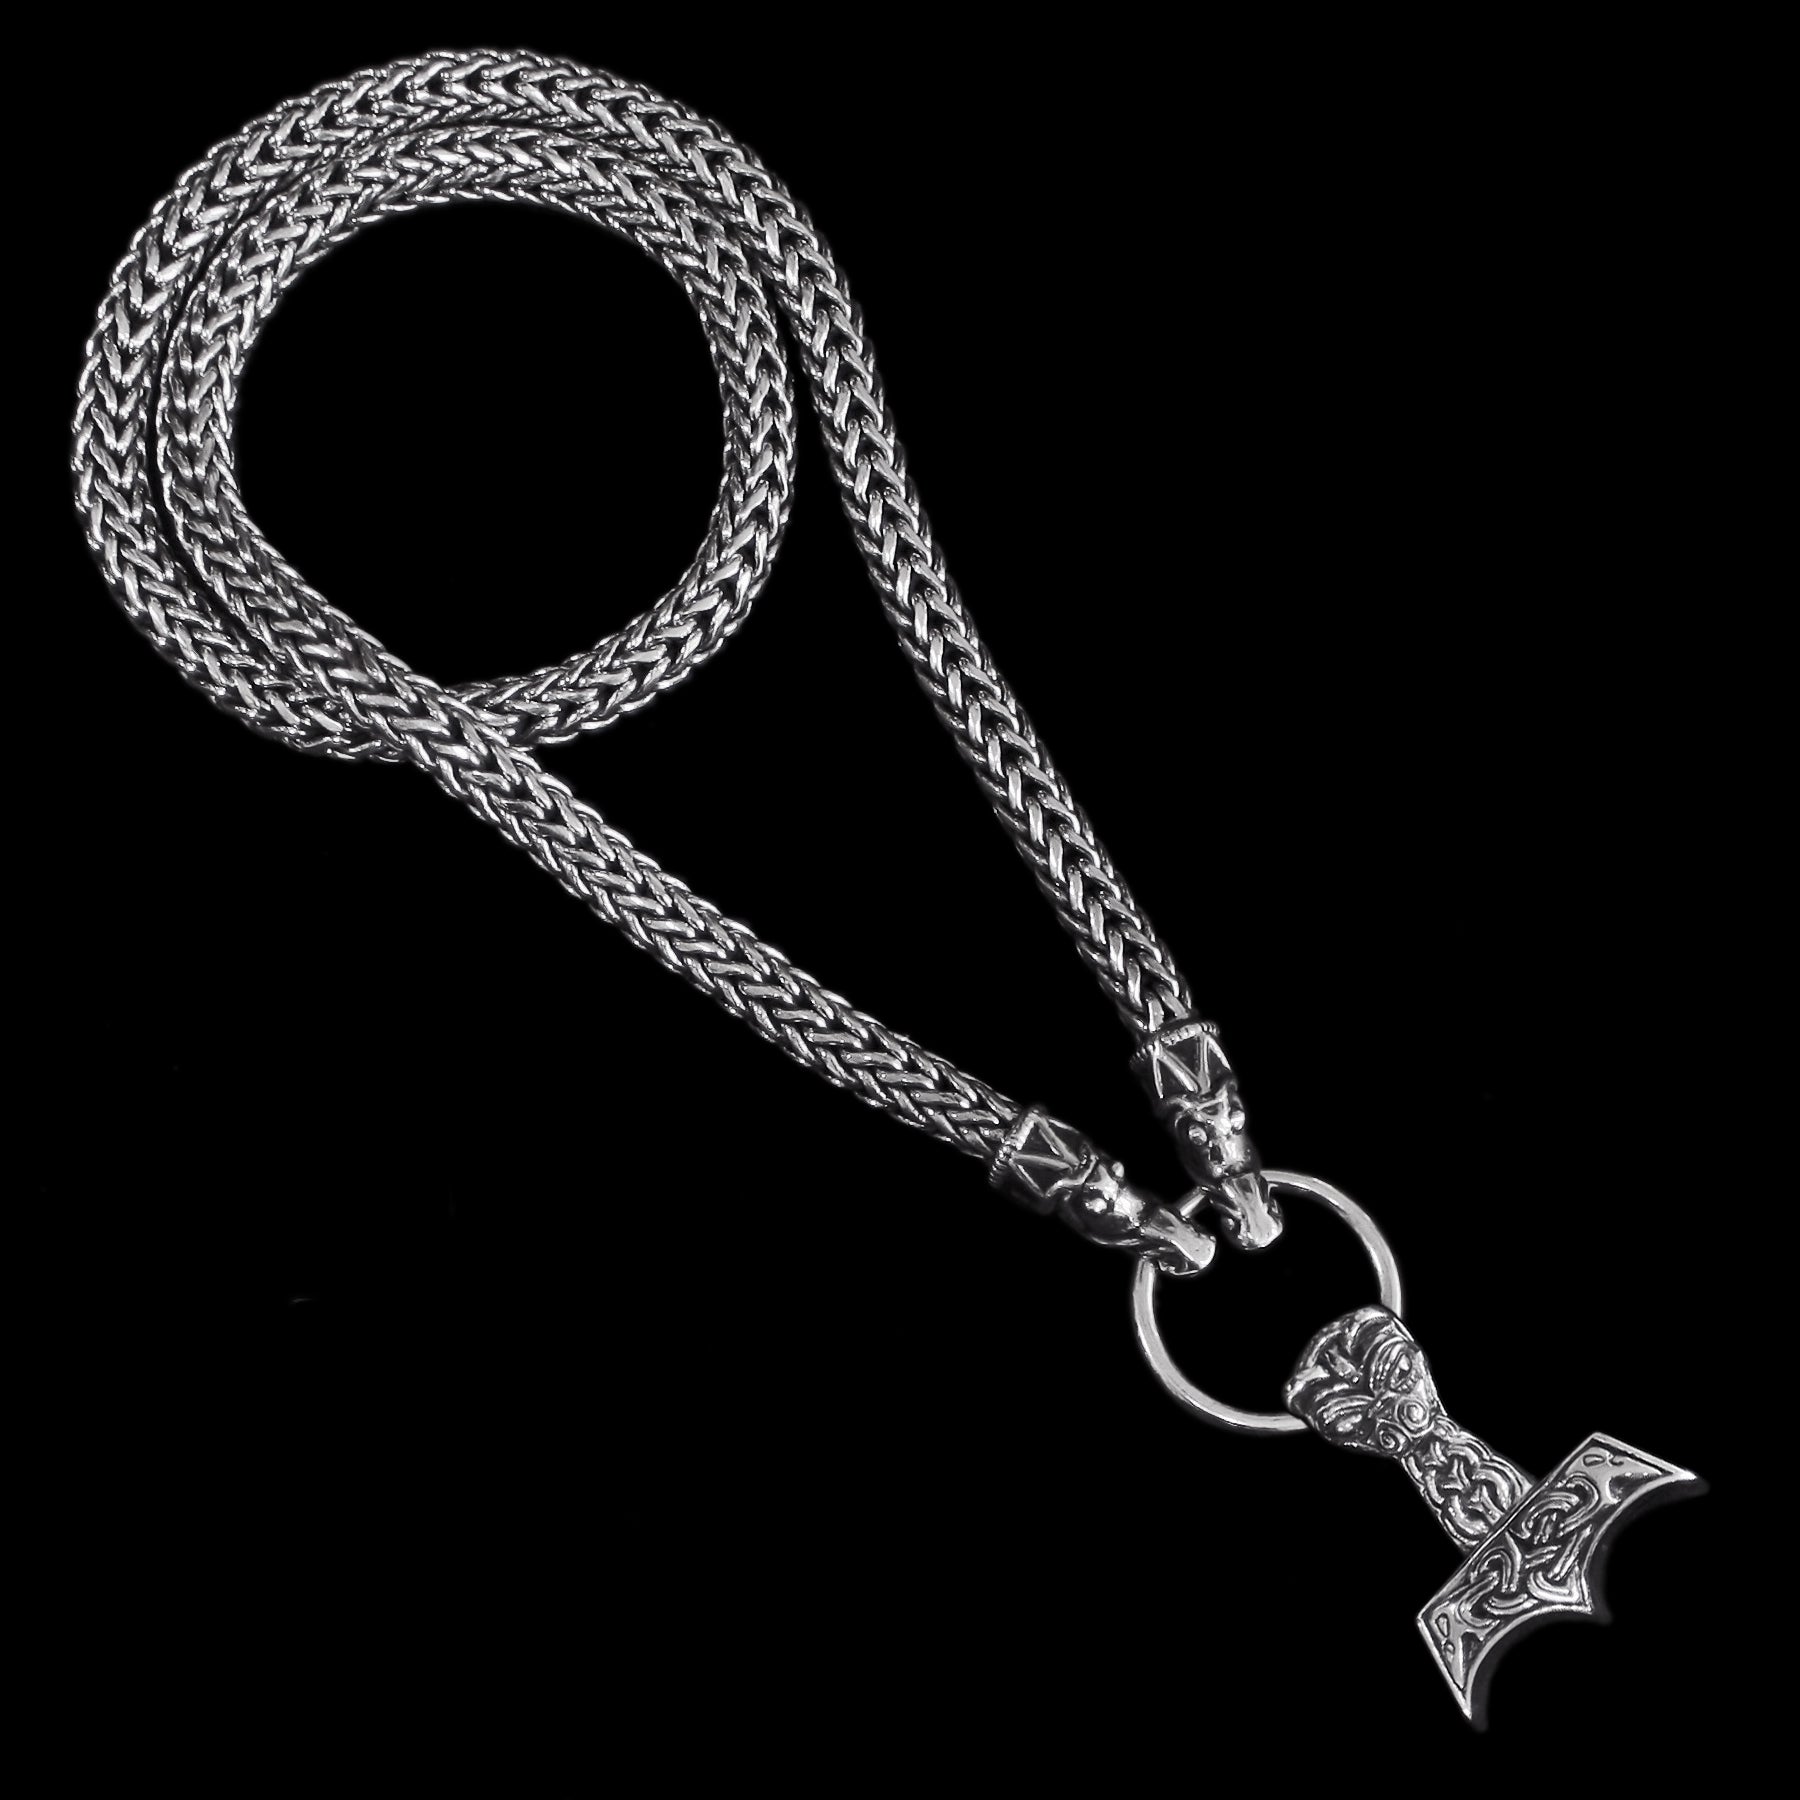 8mm Thick Silver Snake Chain Thors Hammer Necklace - Gotland Dragon Heads - Splt Ring - Large Ferocious Thors Hammer